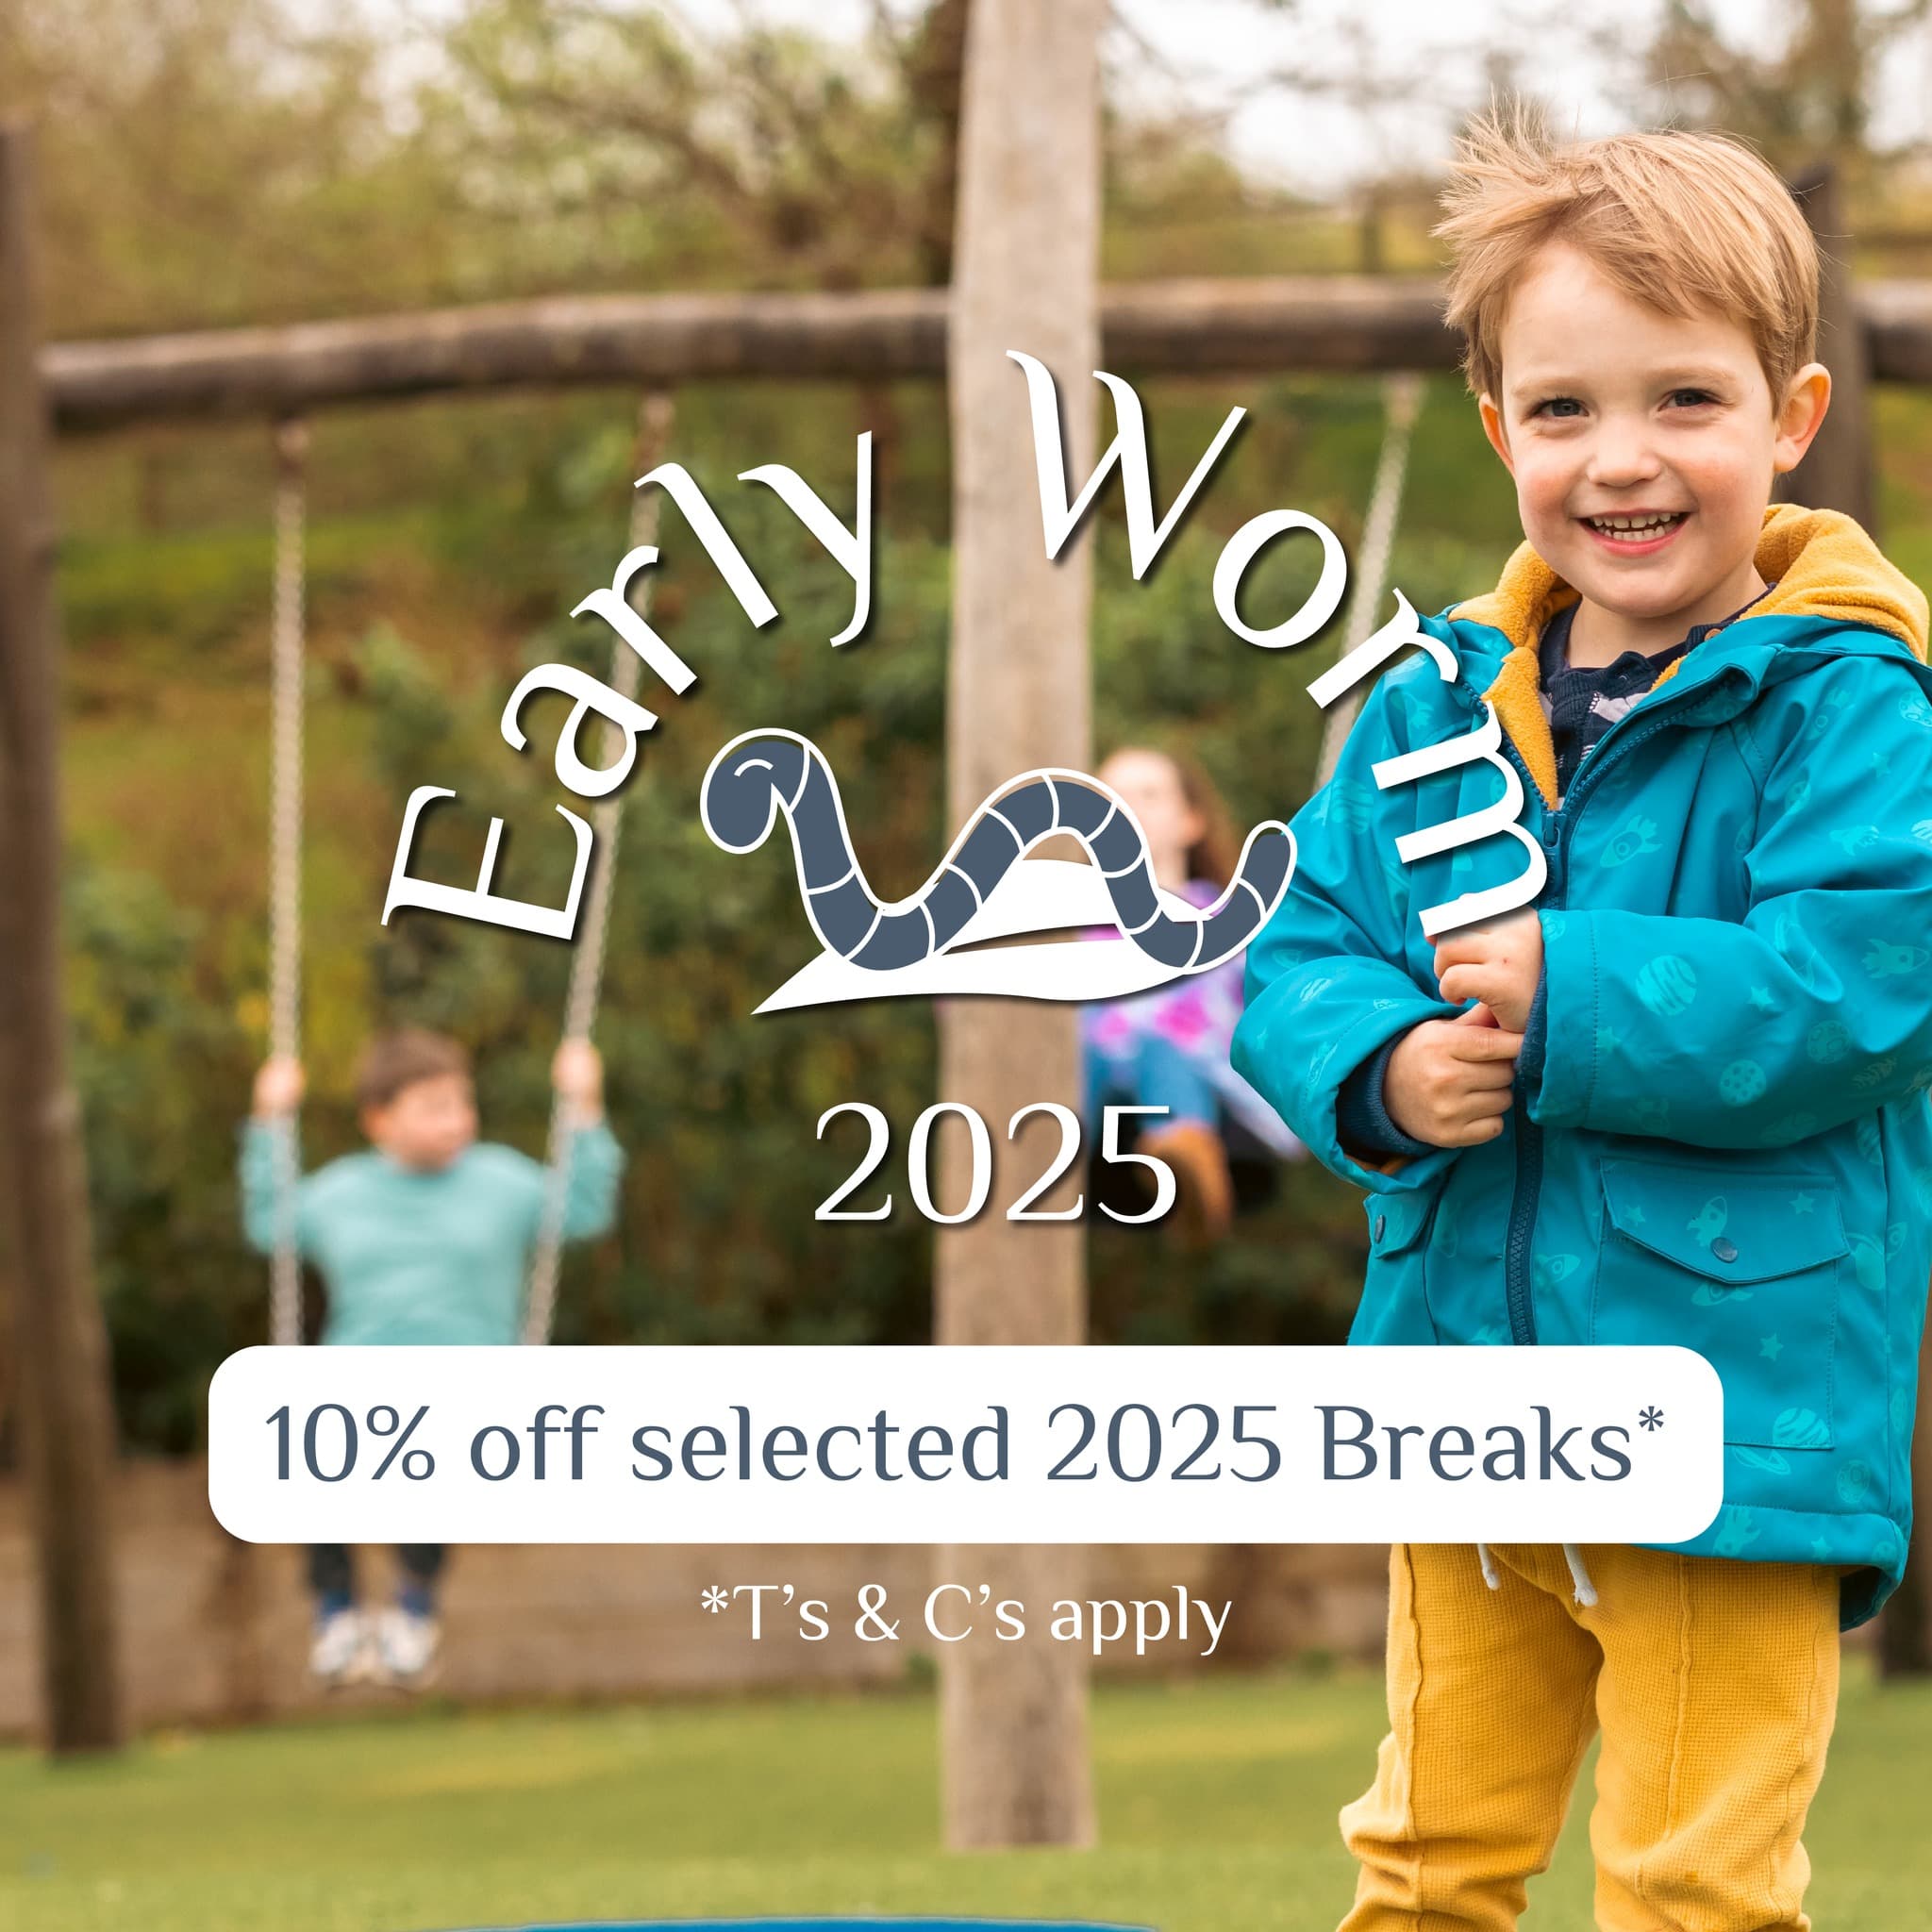 Secure your 2025 getaway for less with our Early Worm Offer!*
 
✨ SAVE up to 10% off selected 2025 breaks 
🪱 Get a wiggle on -  this offer is subject to availability and is for a limited time only

Book now in our bio. 🔗
 
*T&C's Apply

 #toddlerbreak #summerbreak #visitpembrokeshire #visitwales #mybluestonebreak